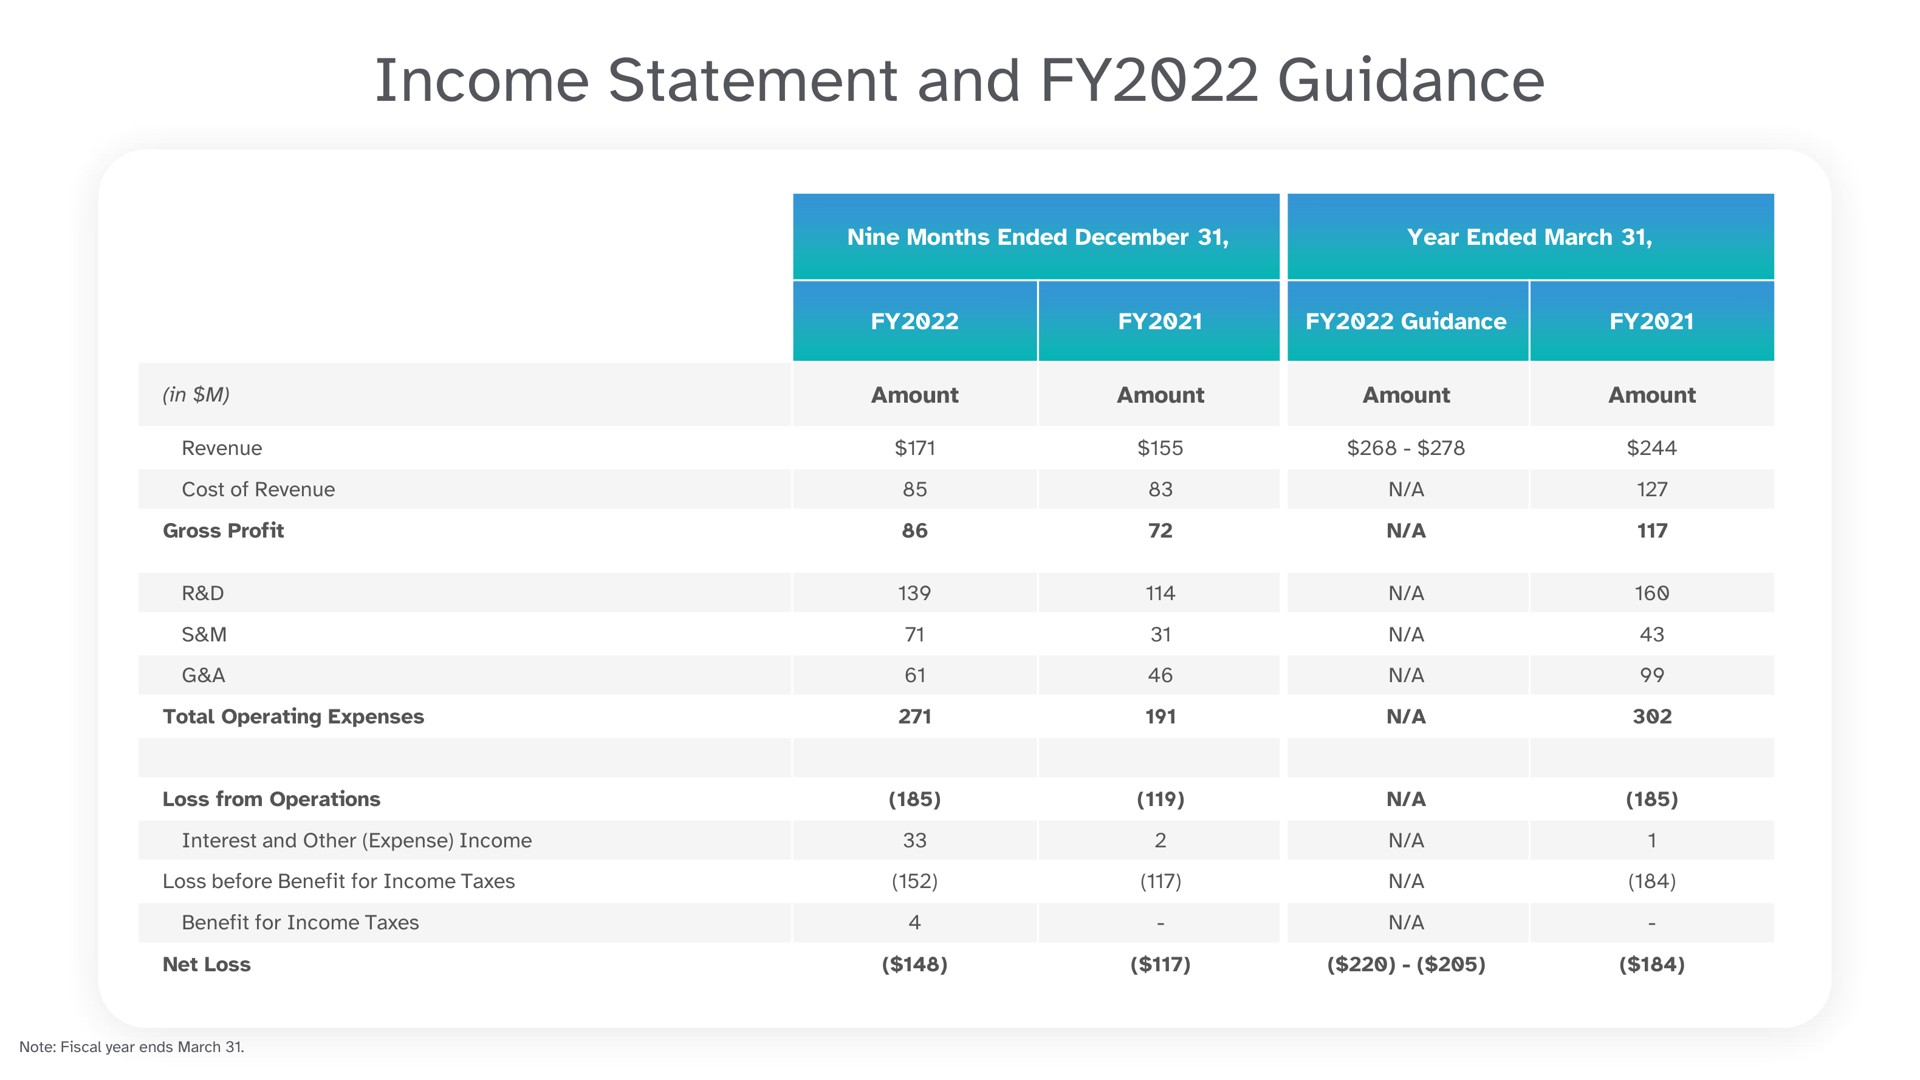 income statement and guidance | 23andMe